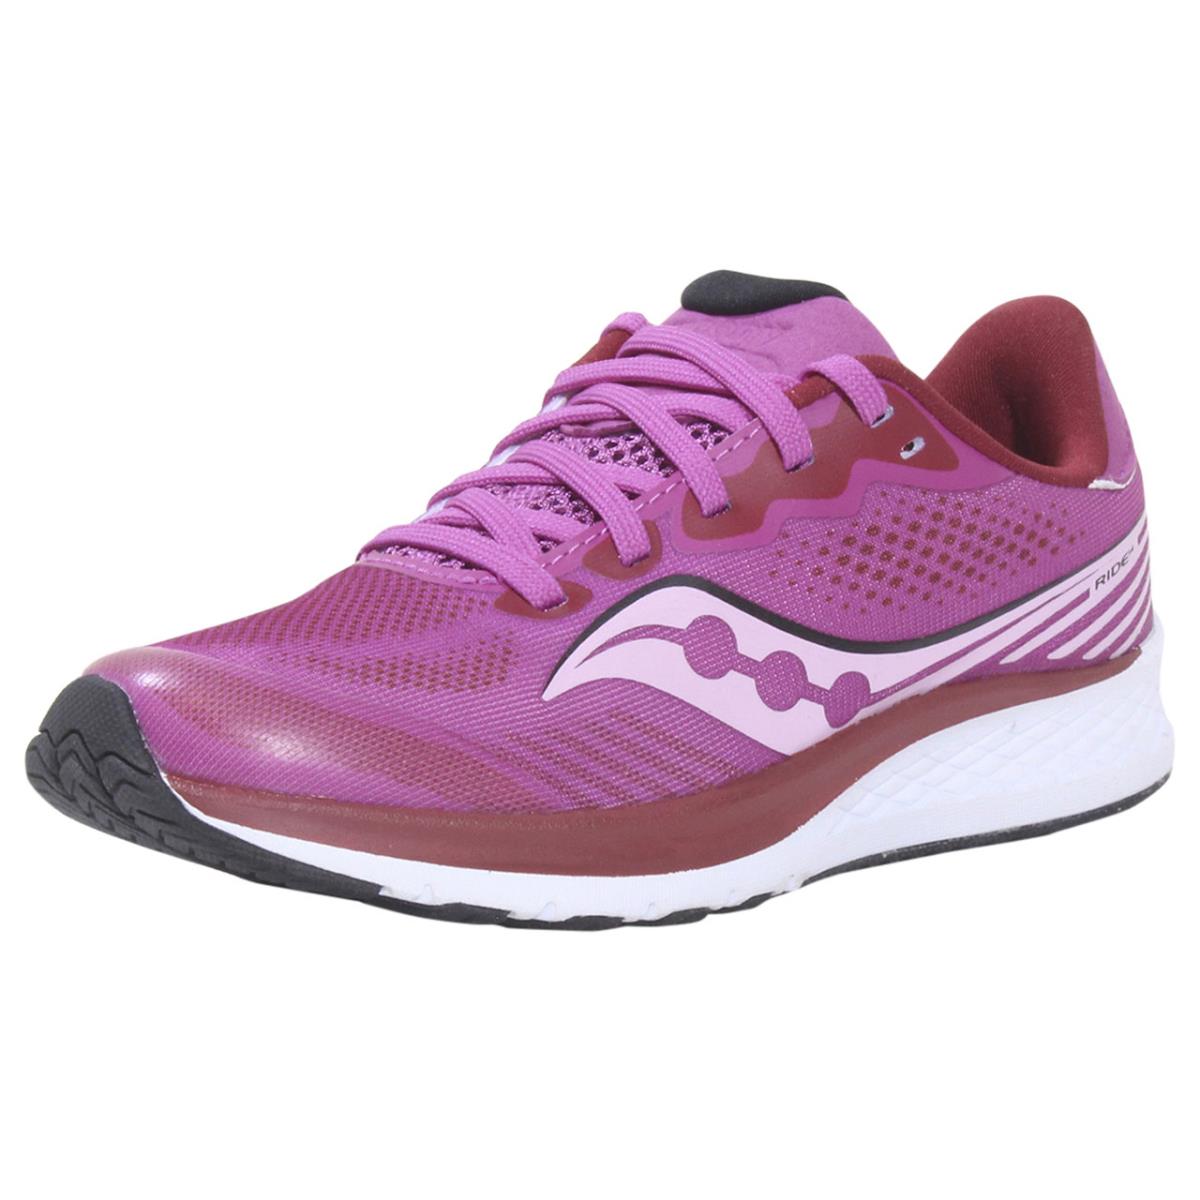 Saucony Girl`s Ride-14 Sneakers Lace Up Running Shoes Pink 4.5